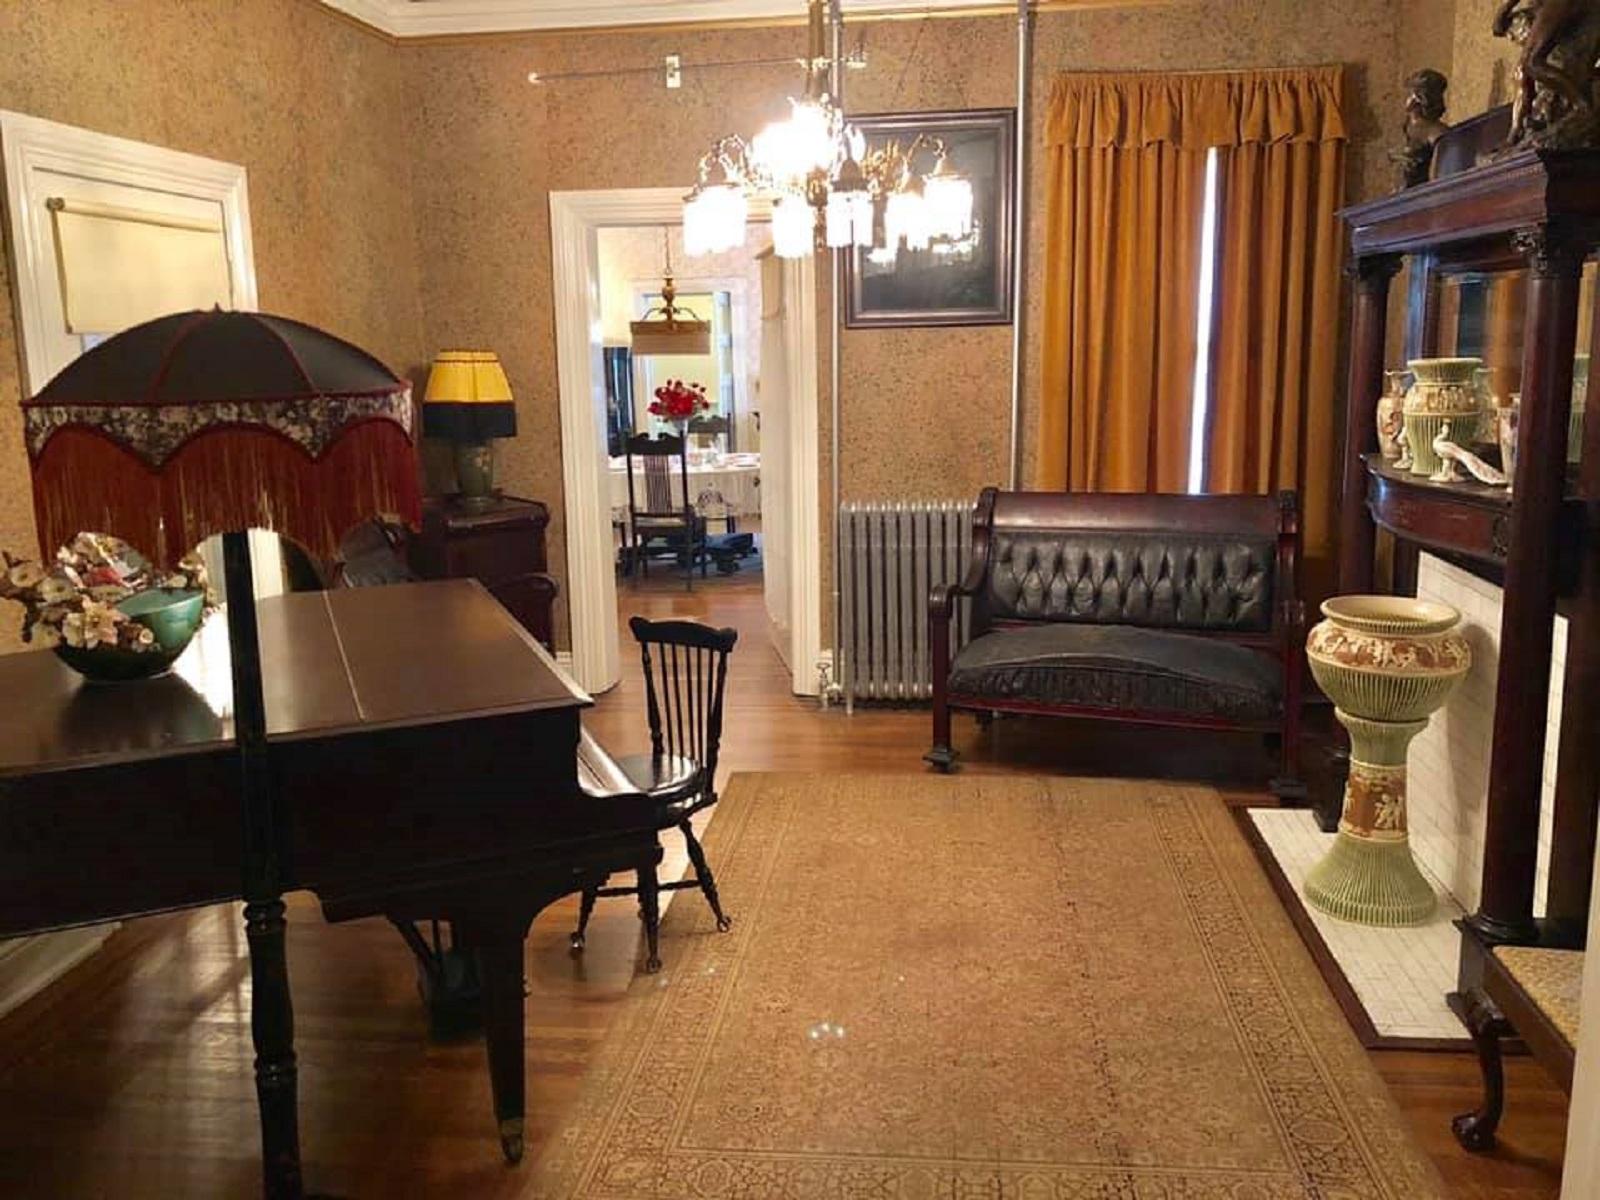 The back parlor with piano, couch, floor lamp and fireplace